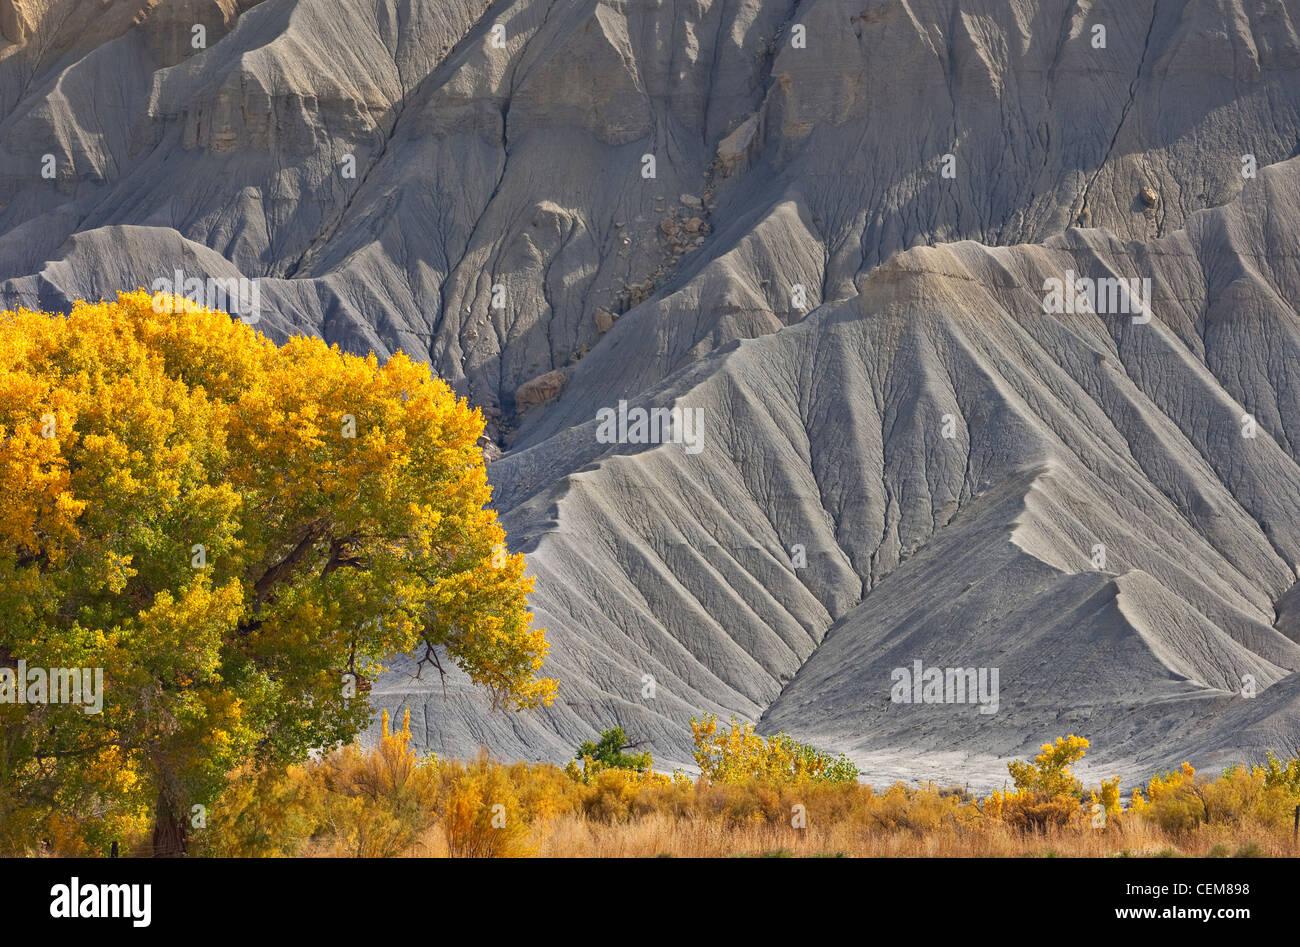 Golden cottonwood tree and grey cliffs of Mancos Shale at South Caineville Mesa, along Highway 24 west of Hanksville, Utah, USA Stock Photo